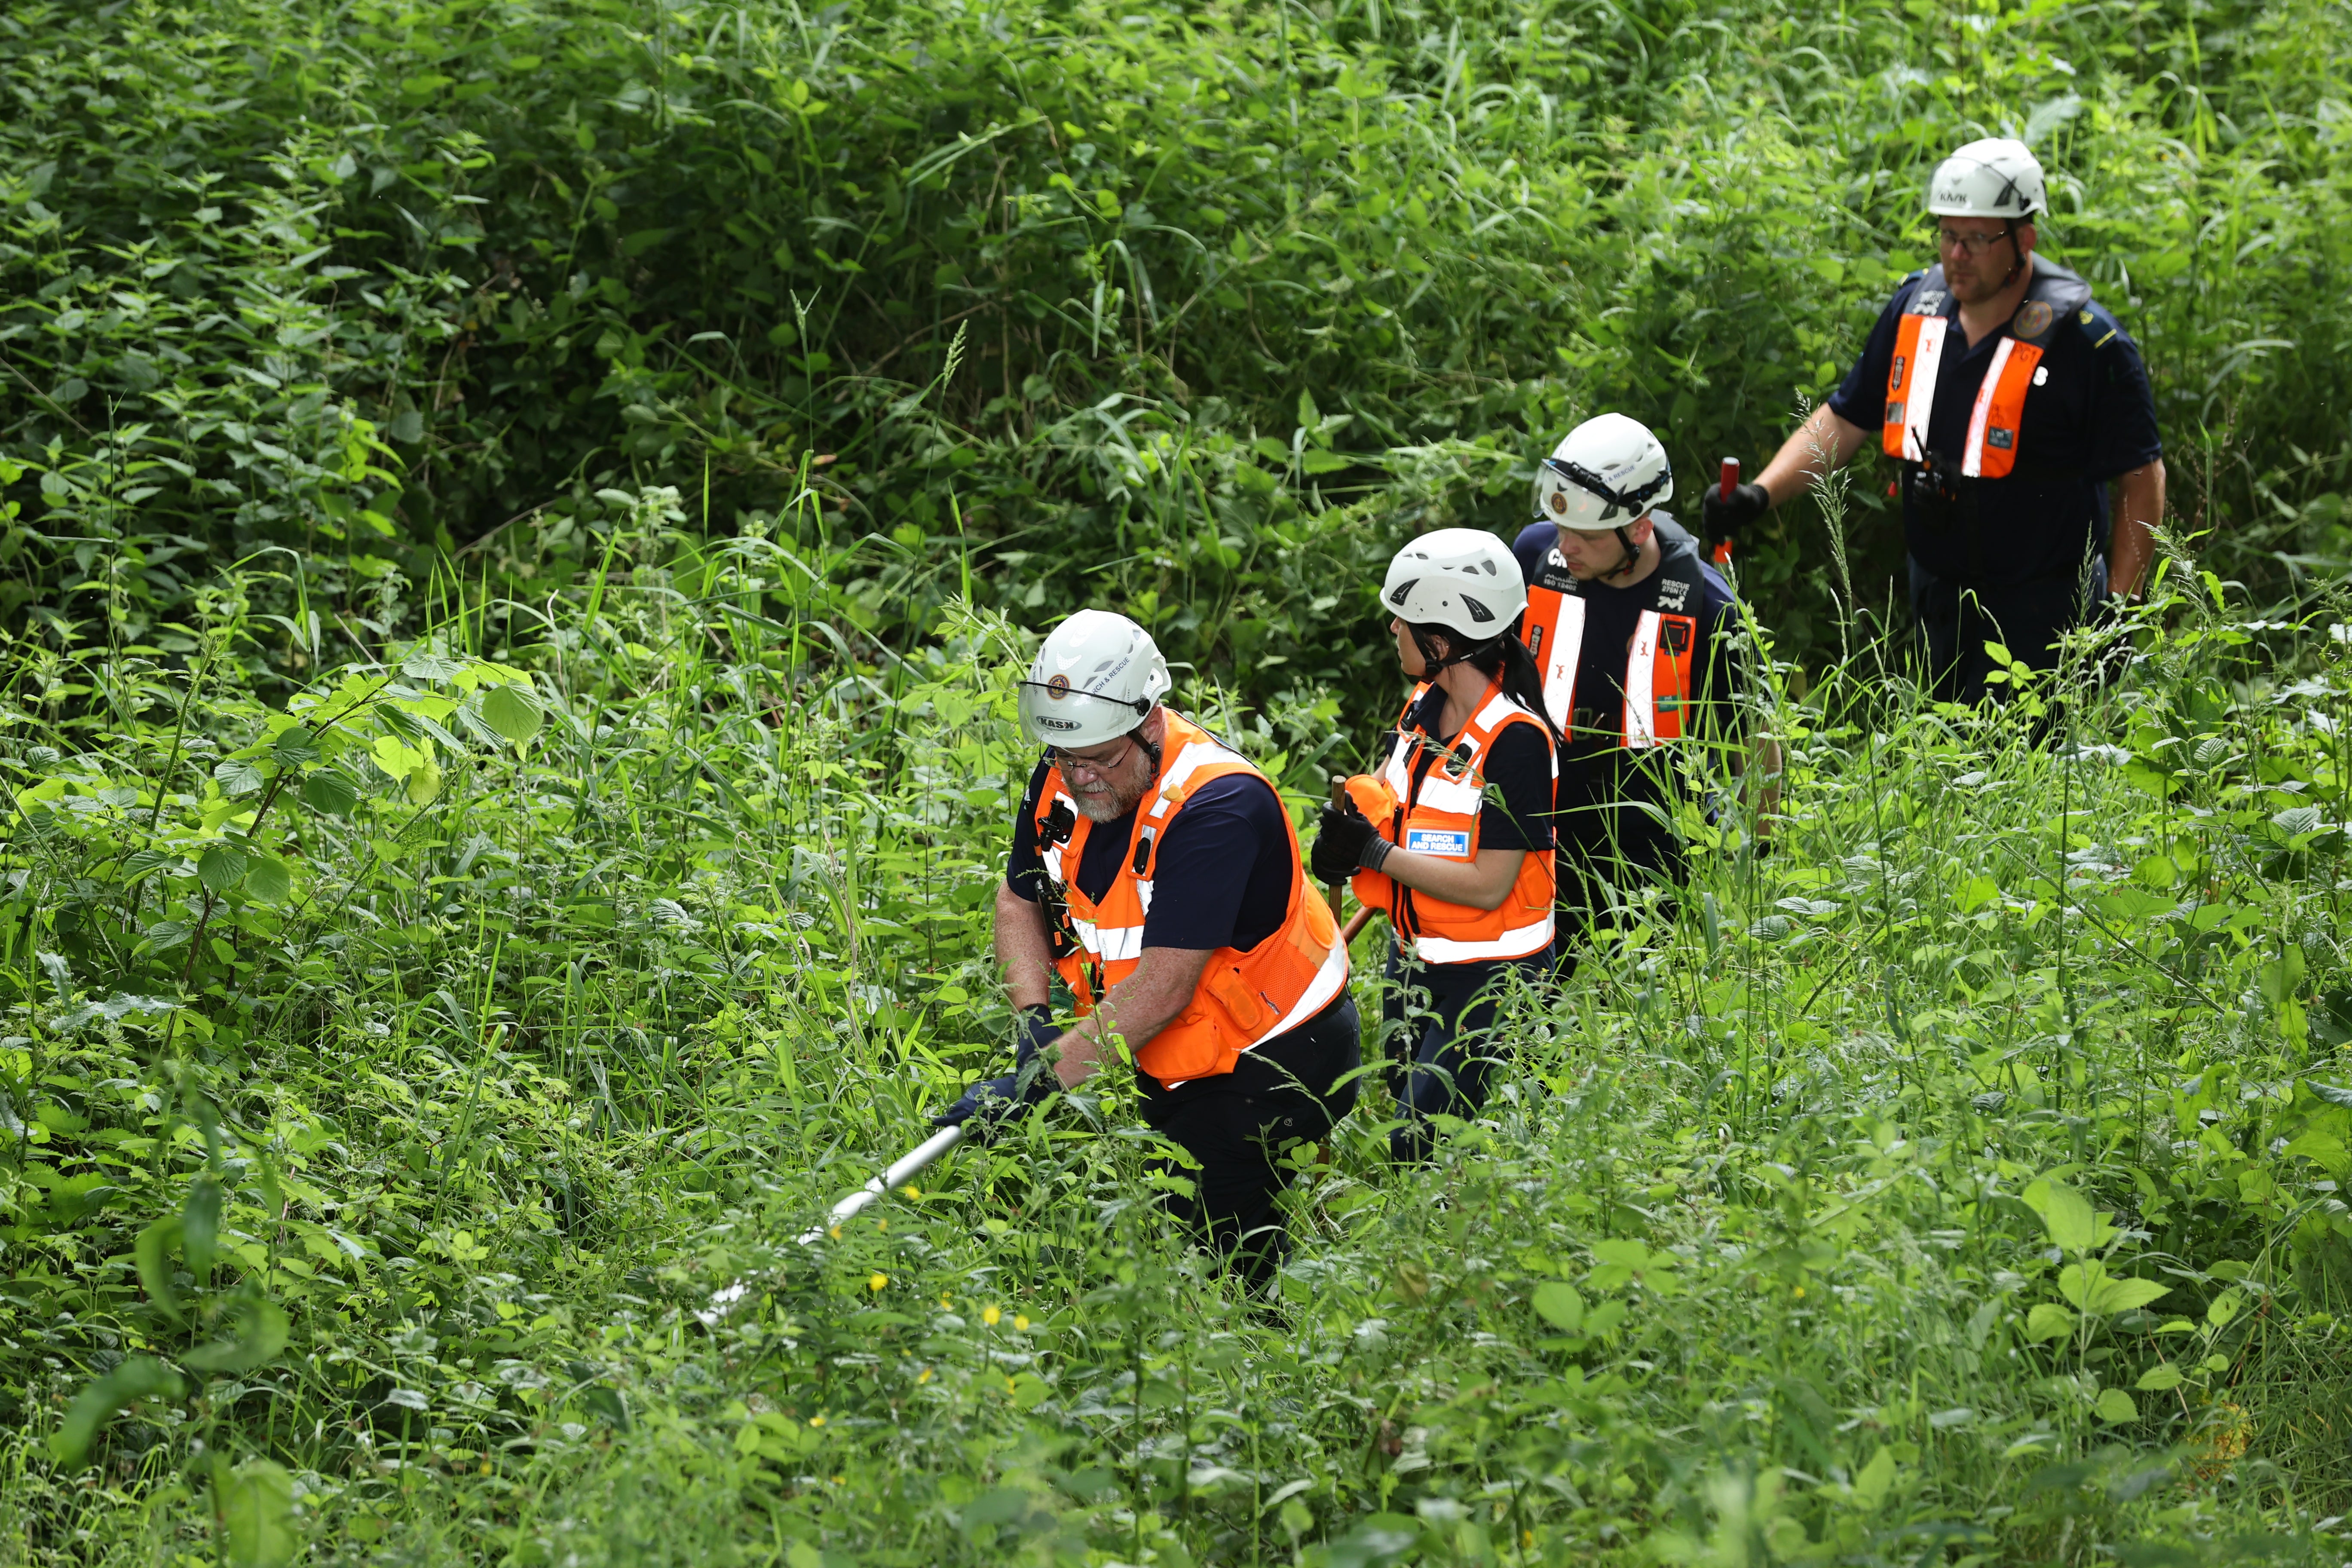 Community Rescue Service volunteers in thick undergrowth near the River Braid in Ballymena during the search for Chloe Mitchell, who was last seen on CCTV in the early hours of June 3 in Ballymena town centre, Co Antrim.